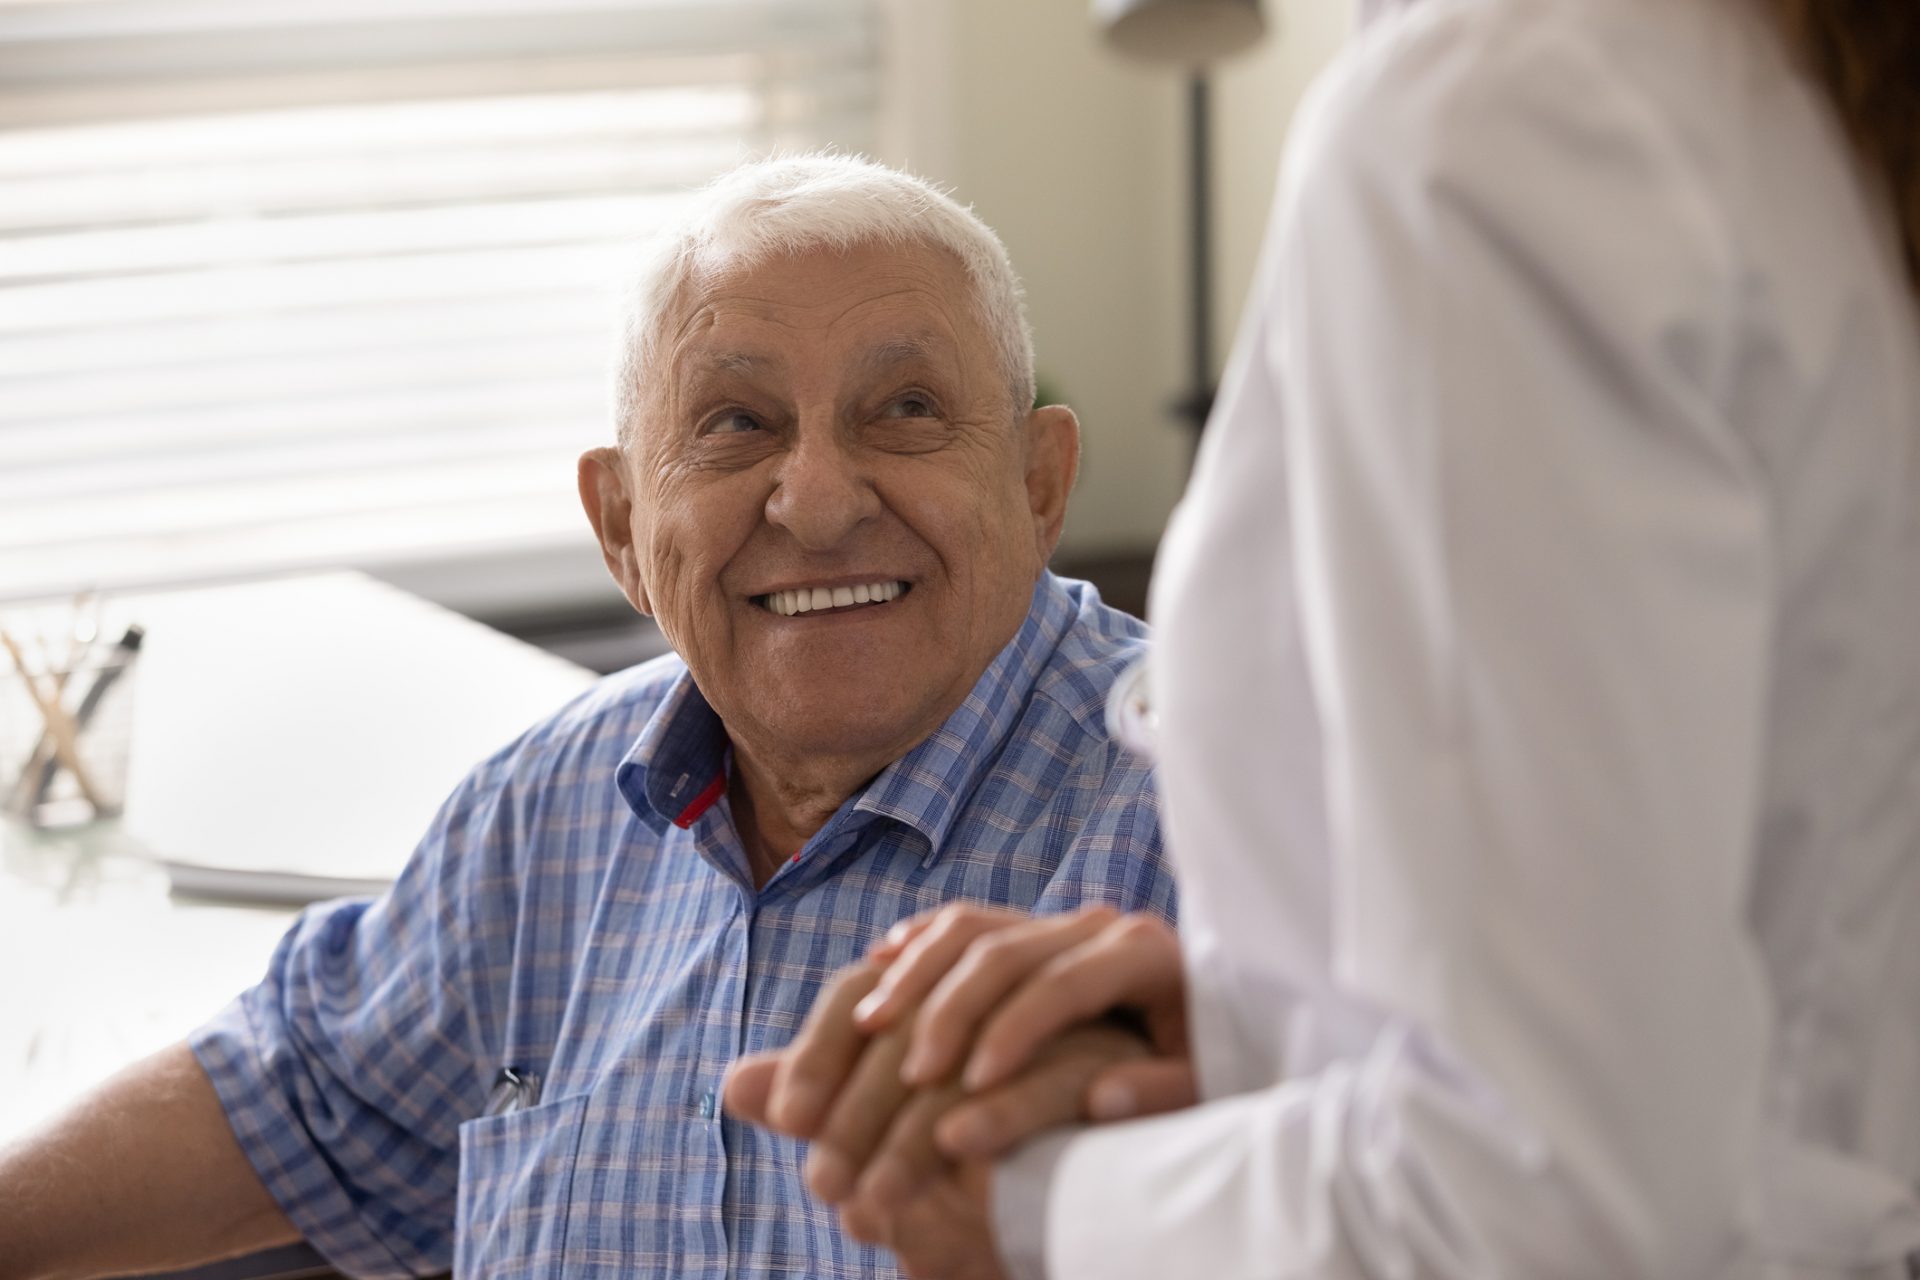 Elderly man smiling and holding hands with a doctor during a check-up in a brightly lit room.